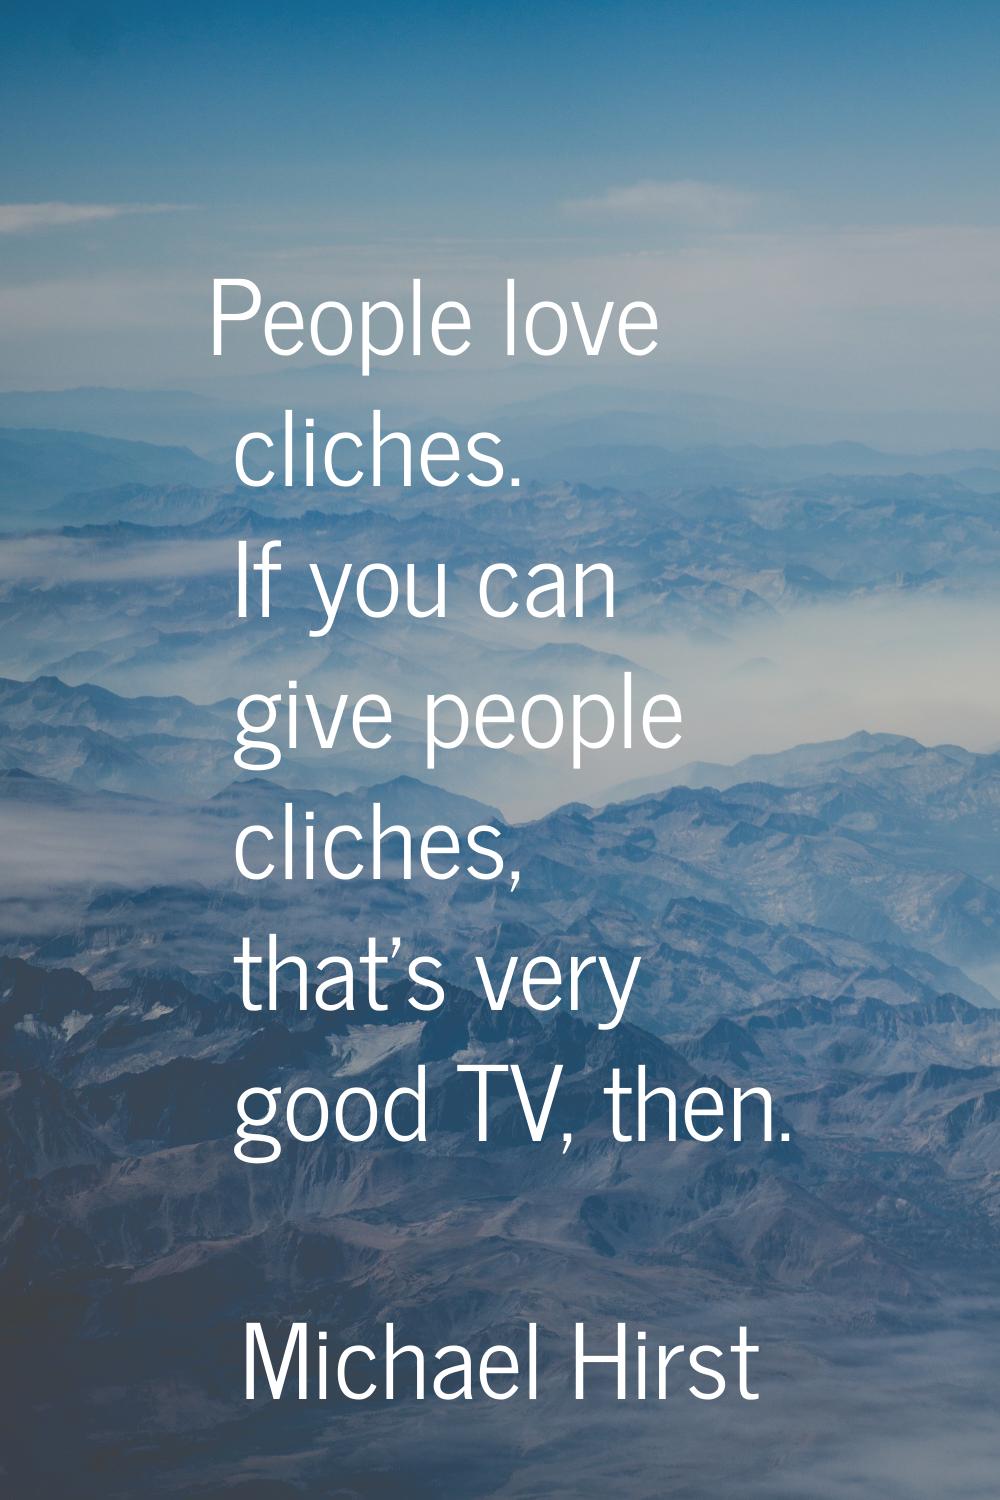 People love cliches. If you can give people cliches, that's very good TV, then.